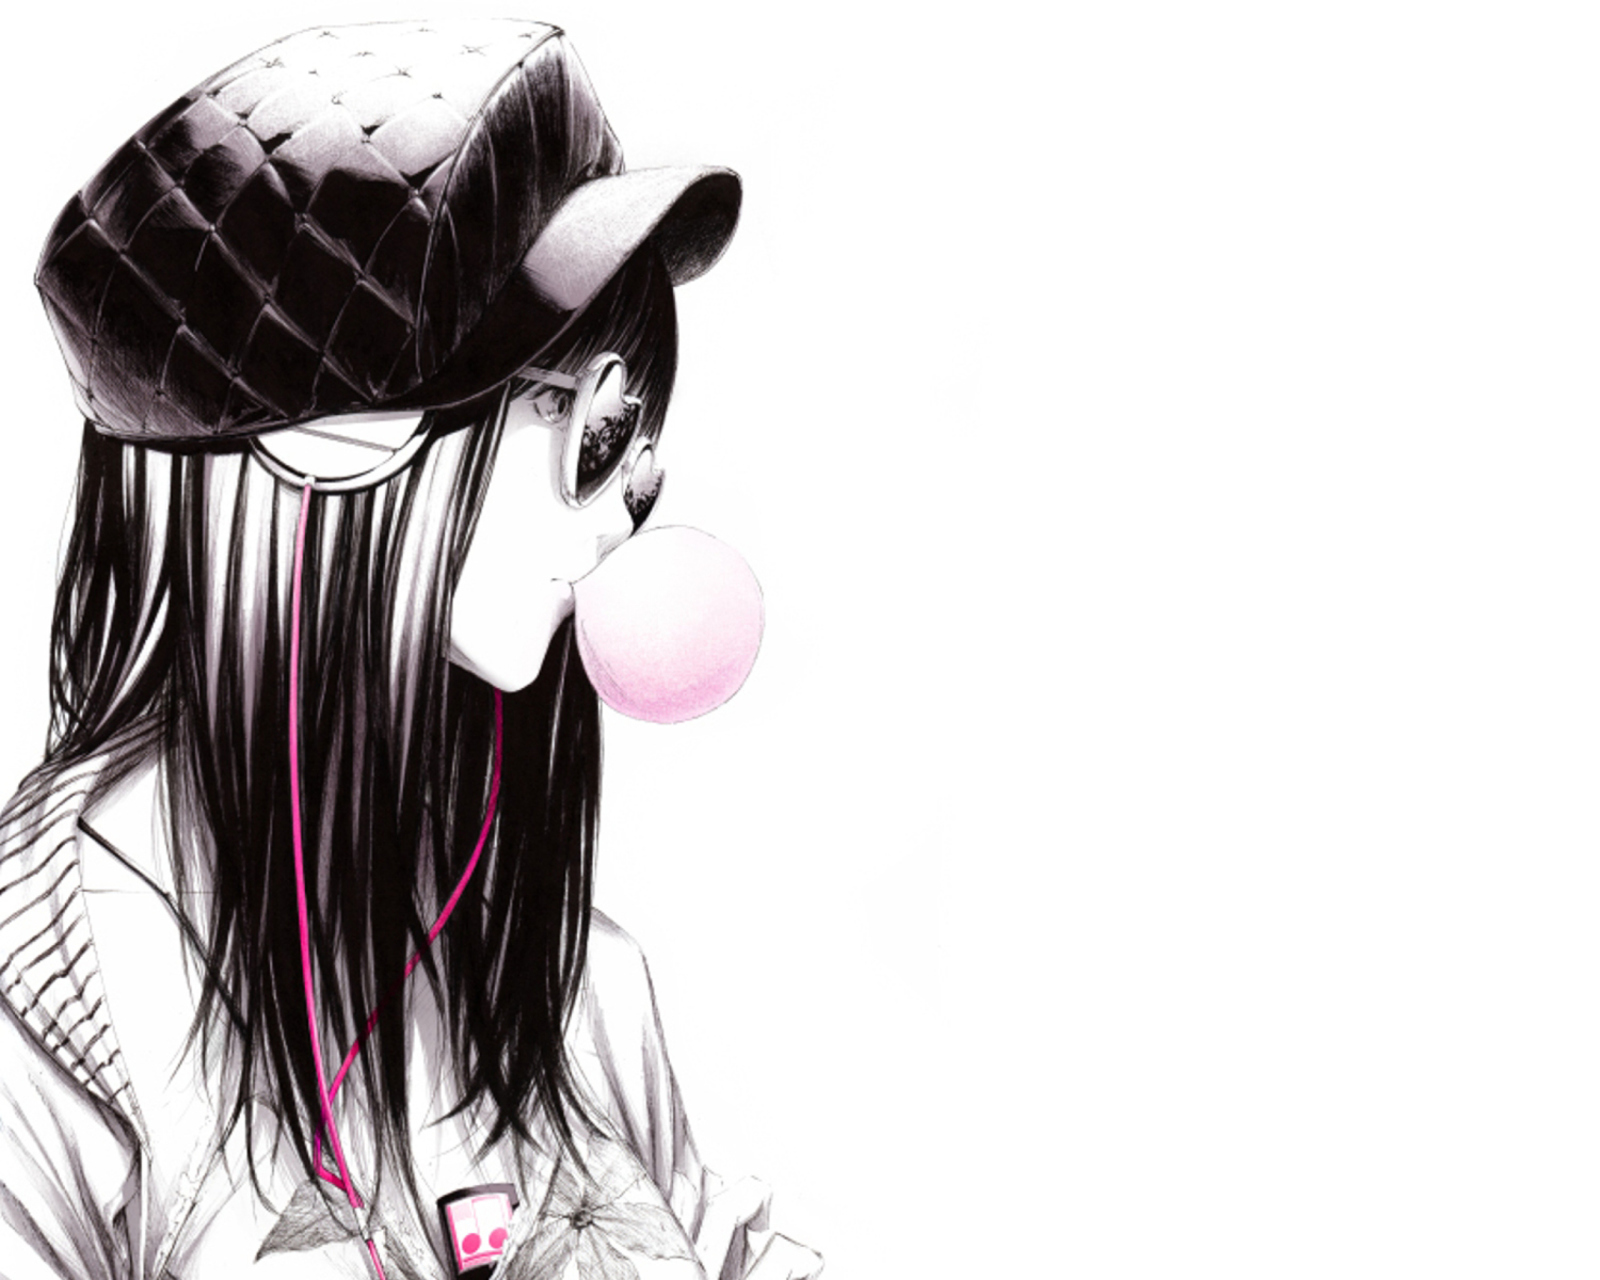 Scatch Of Girl In With Headphones And Gum wallpaper 1600x1280